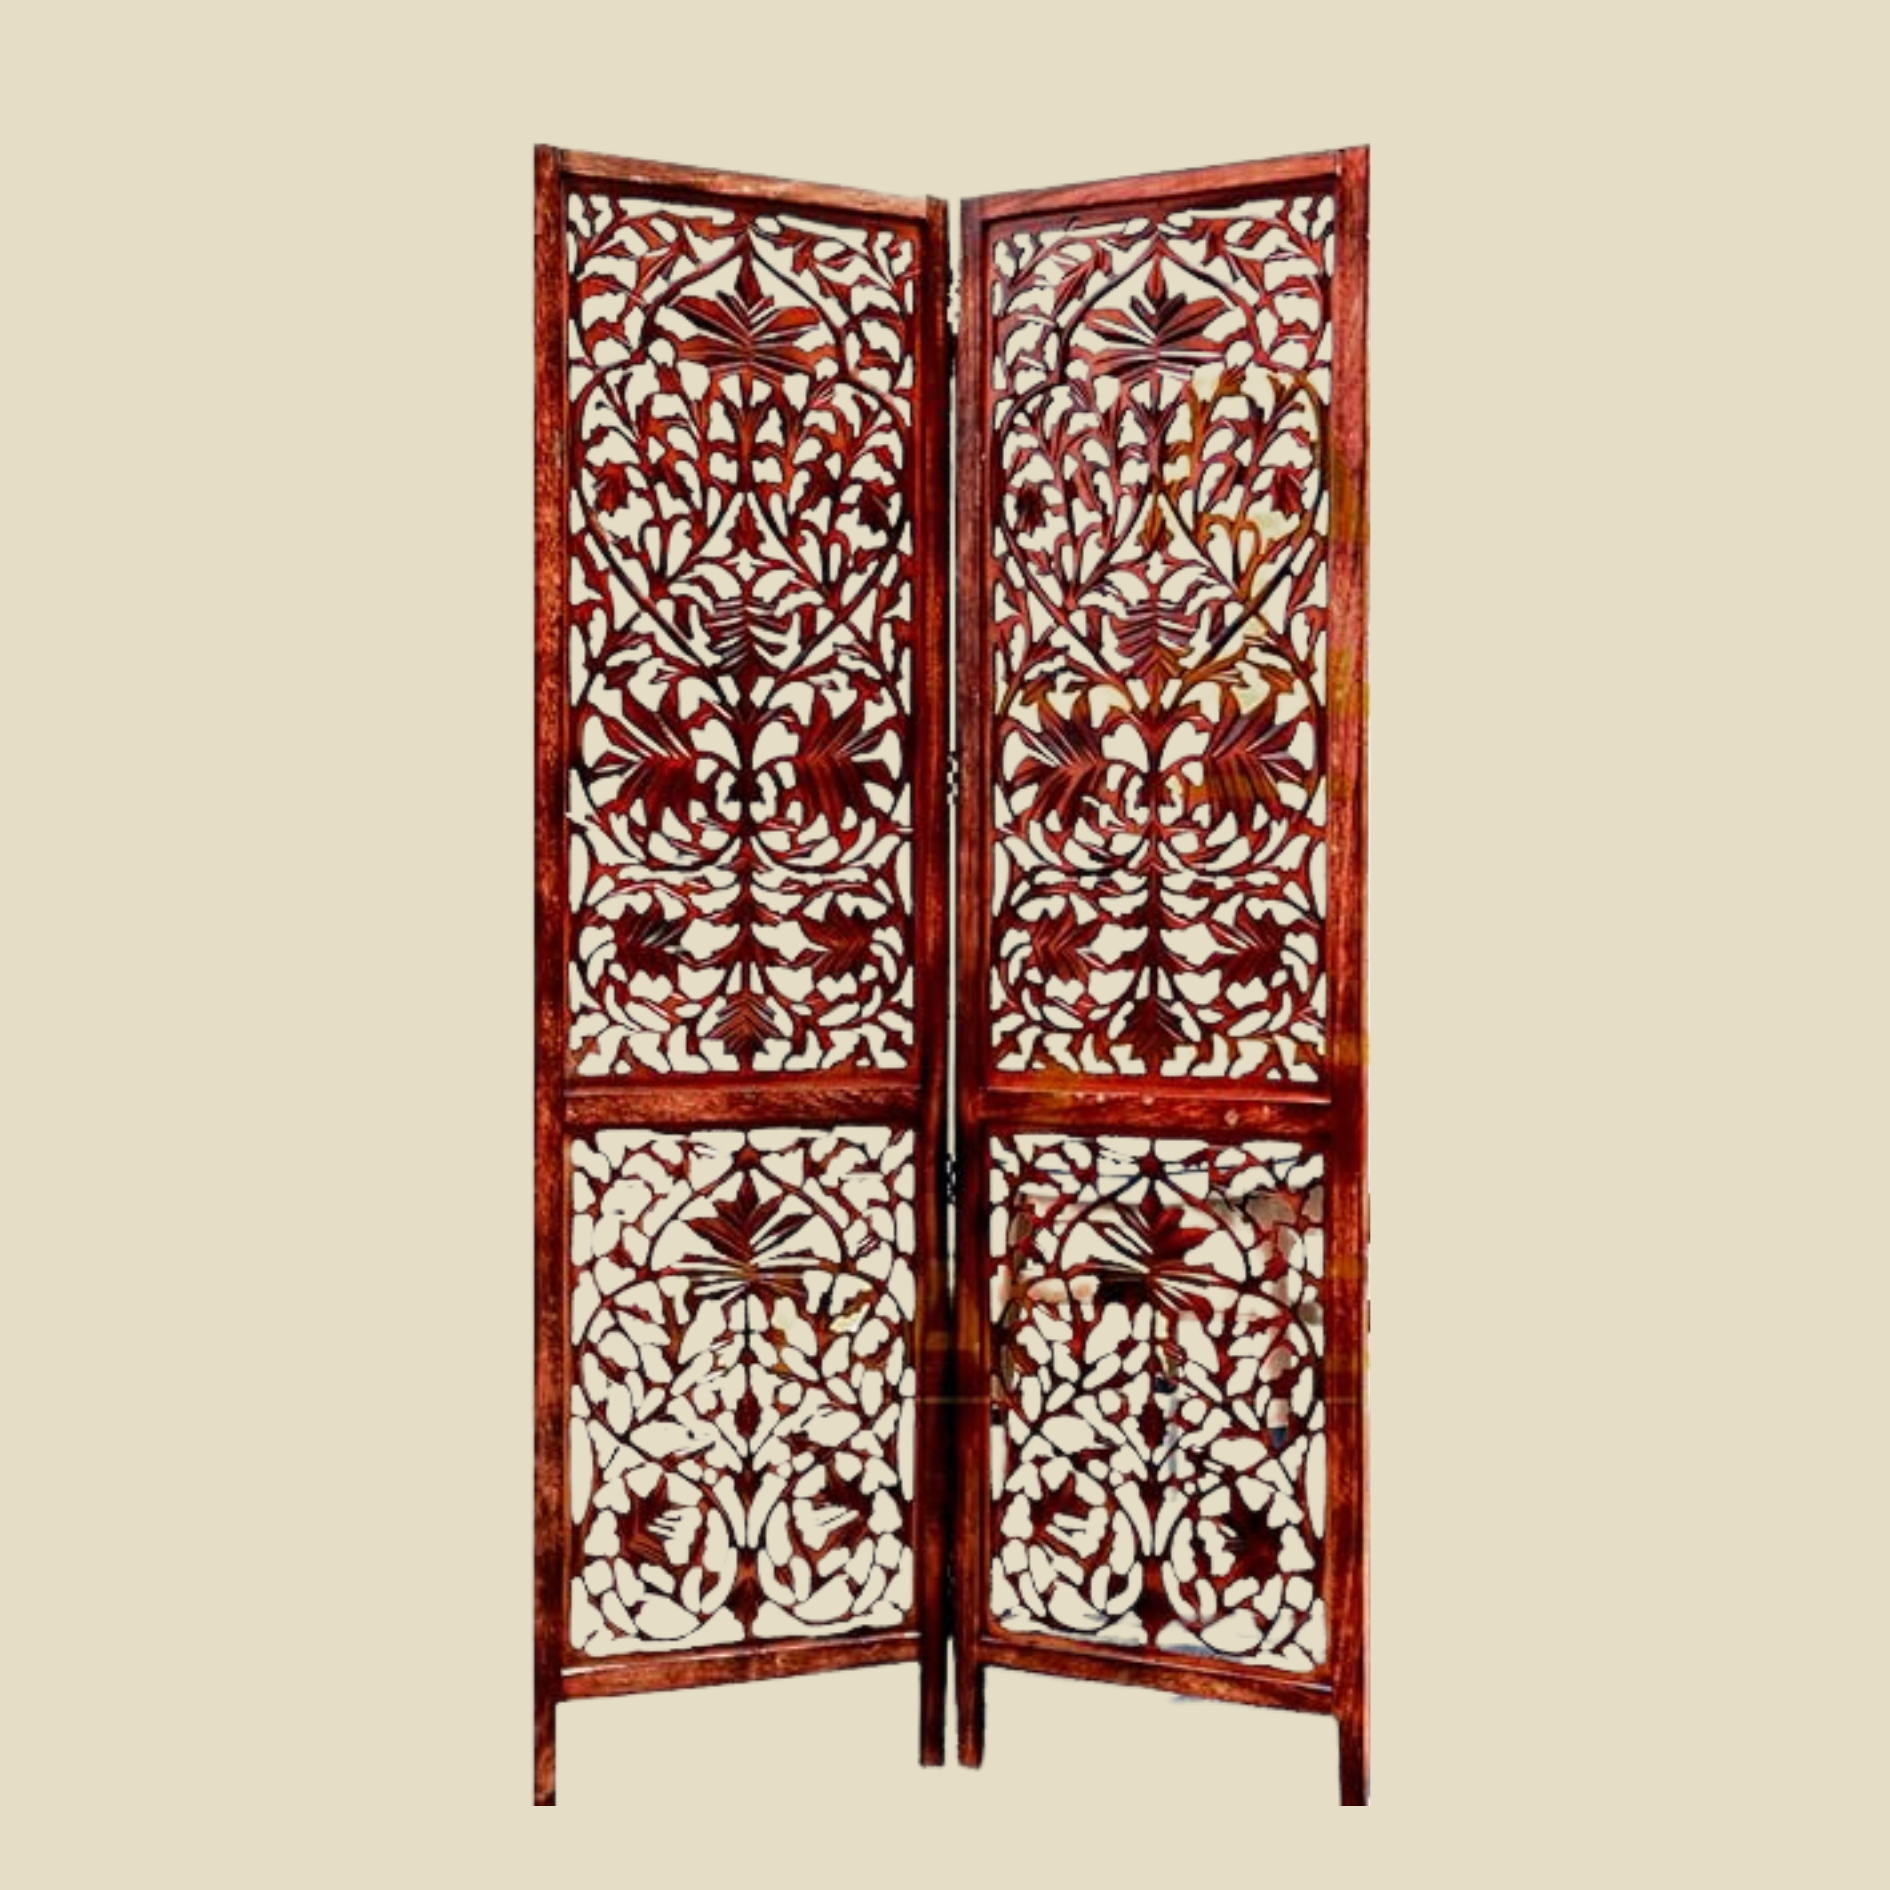 Wooden Room Divider Partition Screen Separators with Folding Doors for Living Room ( Sheesham Shade)